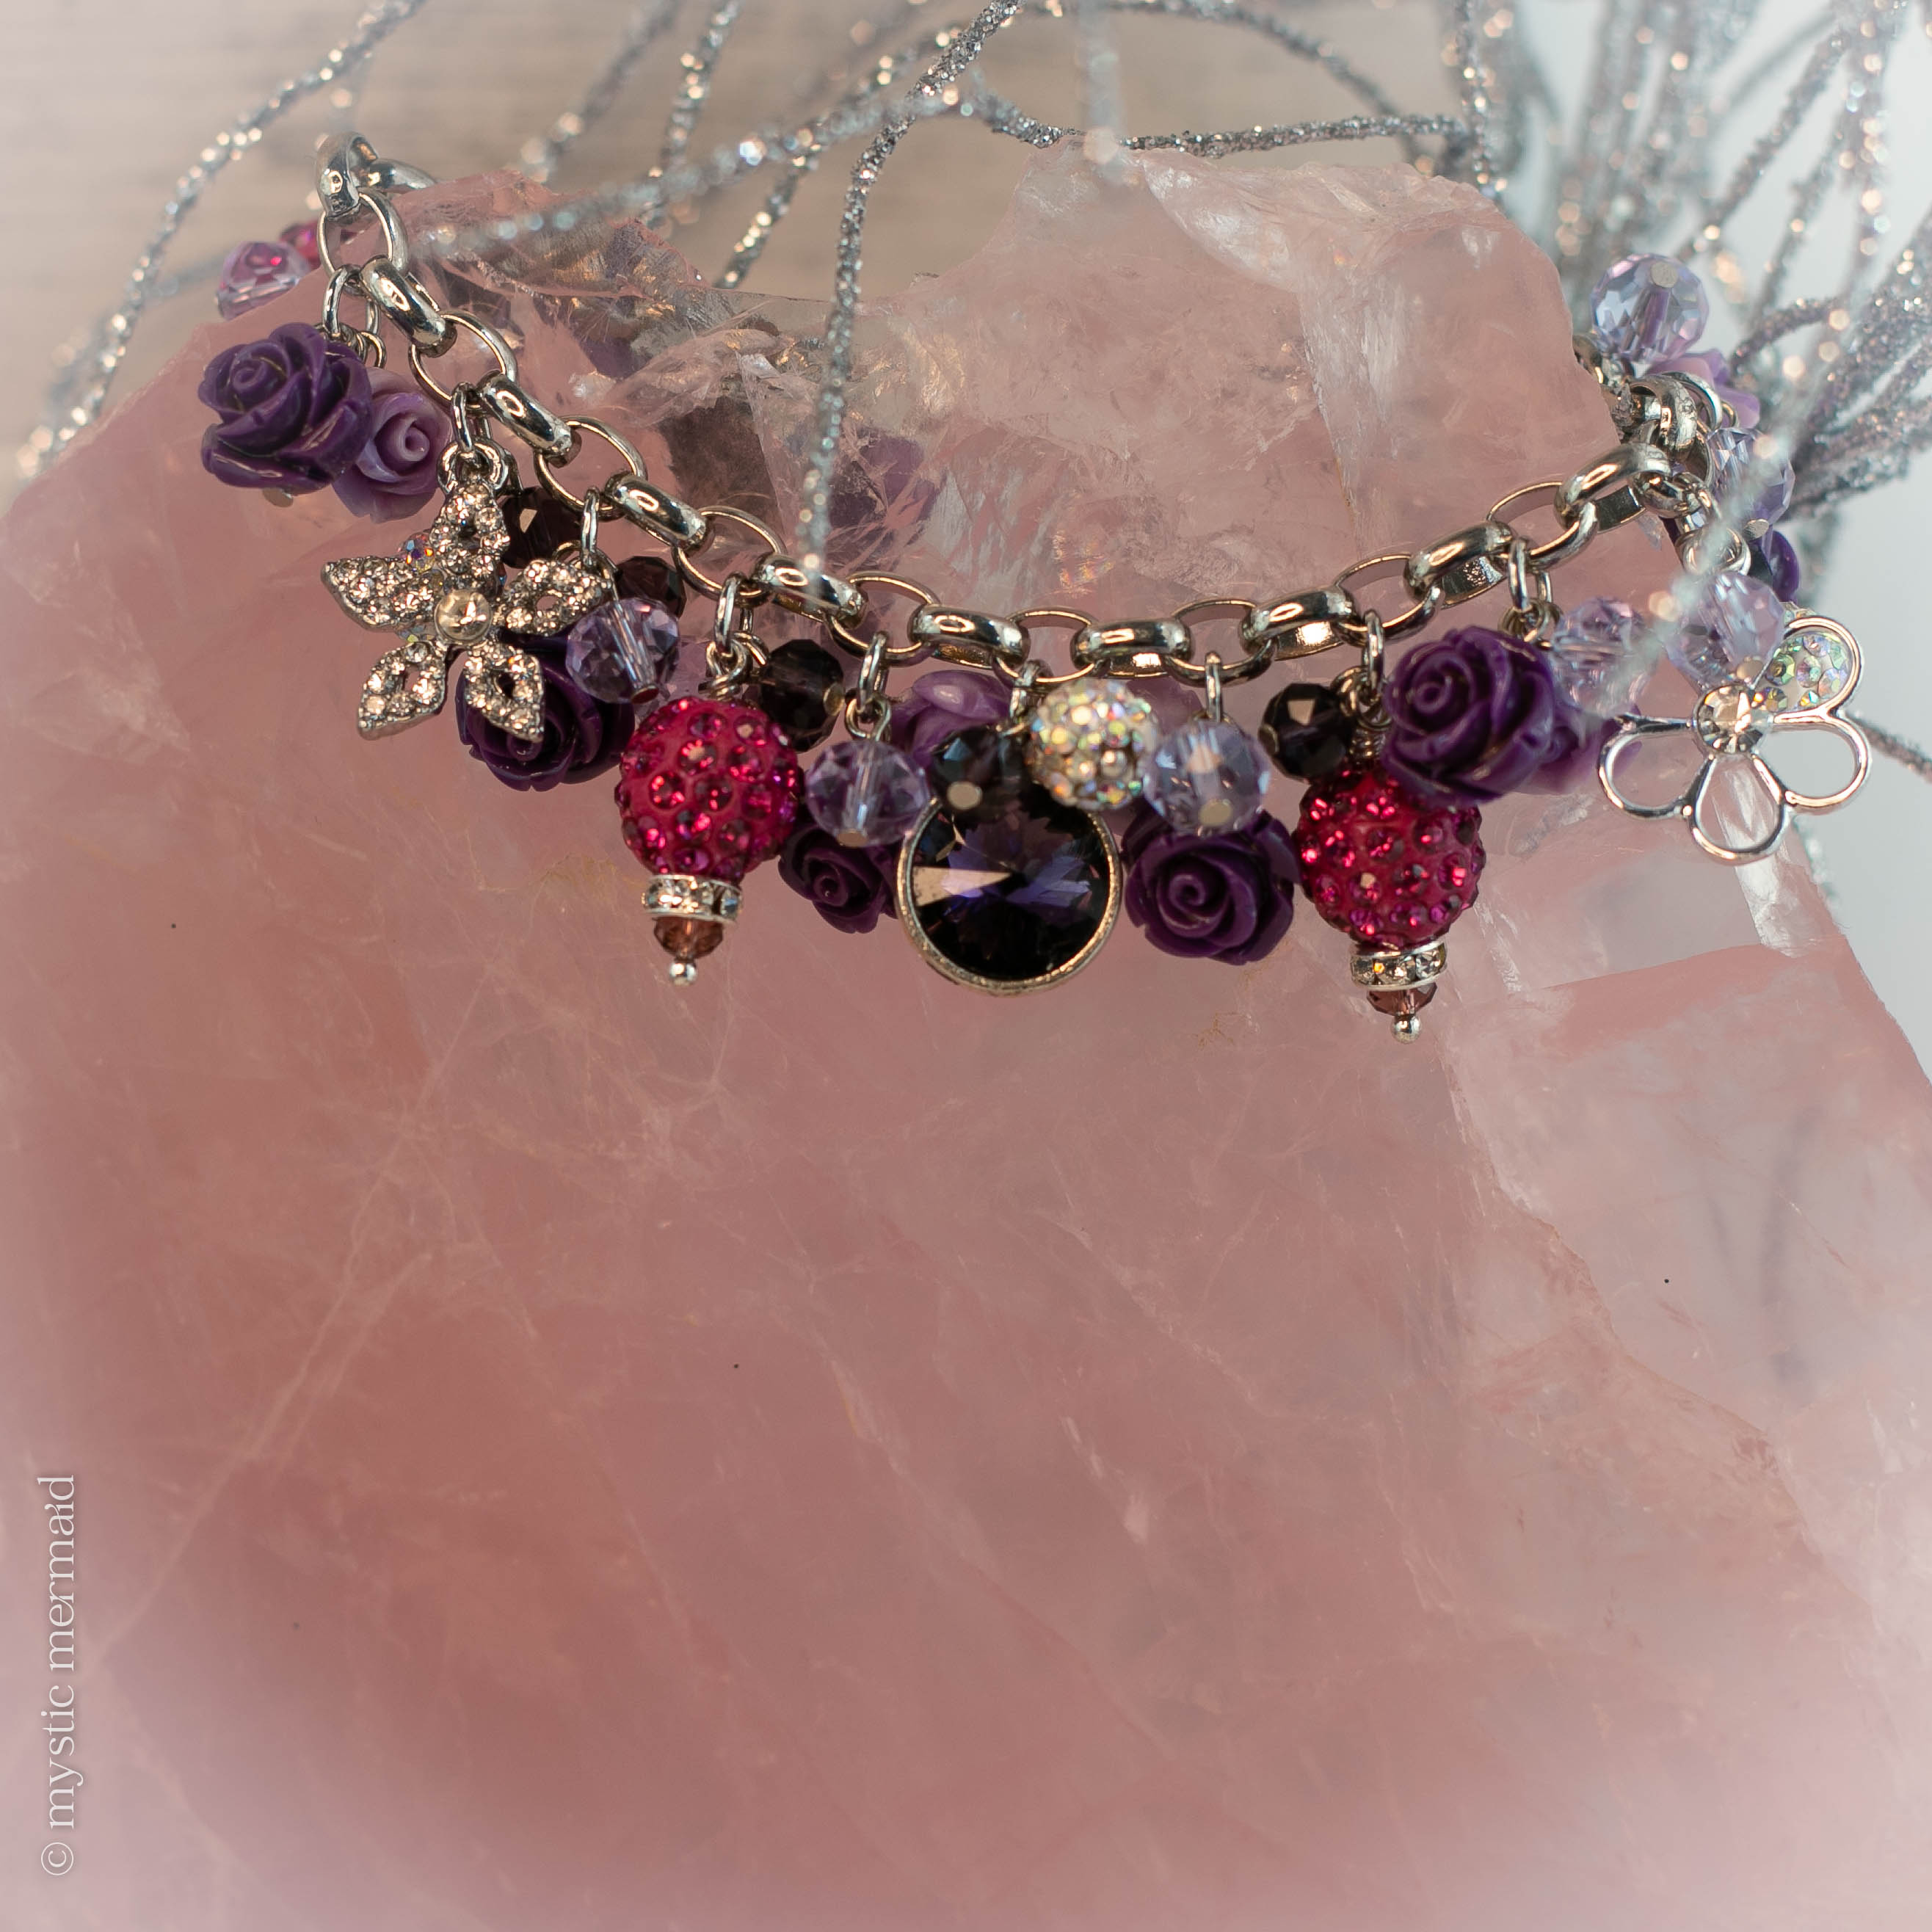 Sparkles on your Blossoms - Purple and Fuchsia In Full Bloom Bracelet